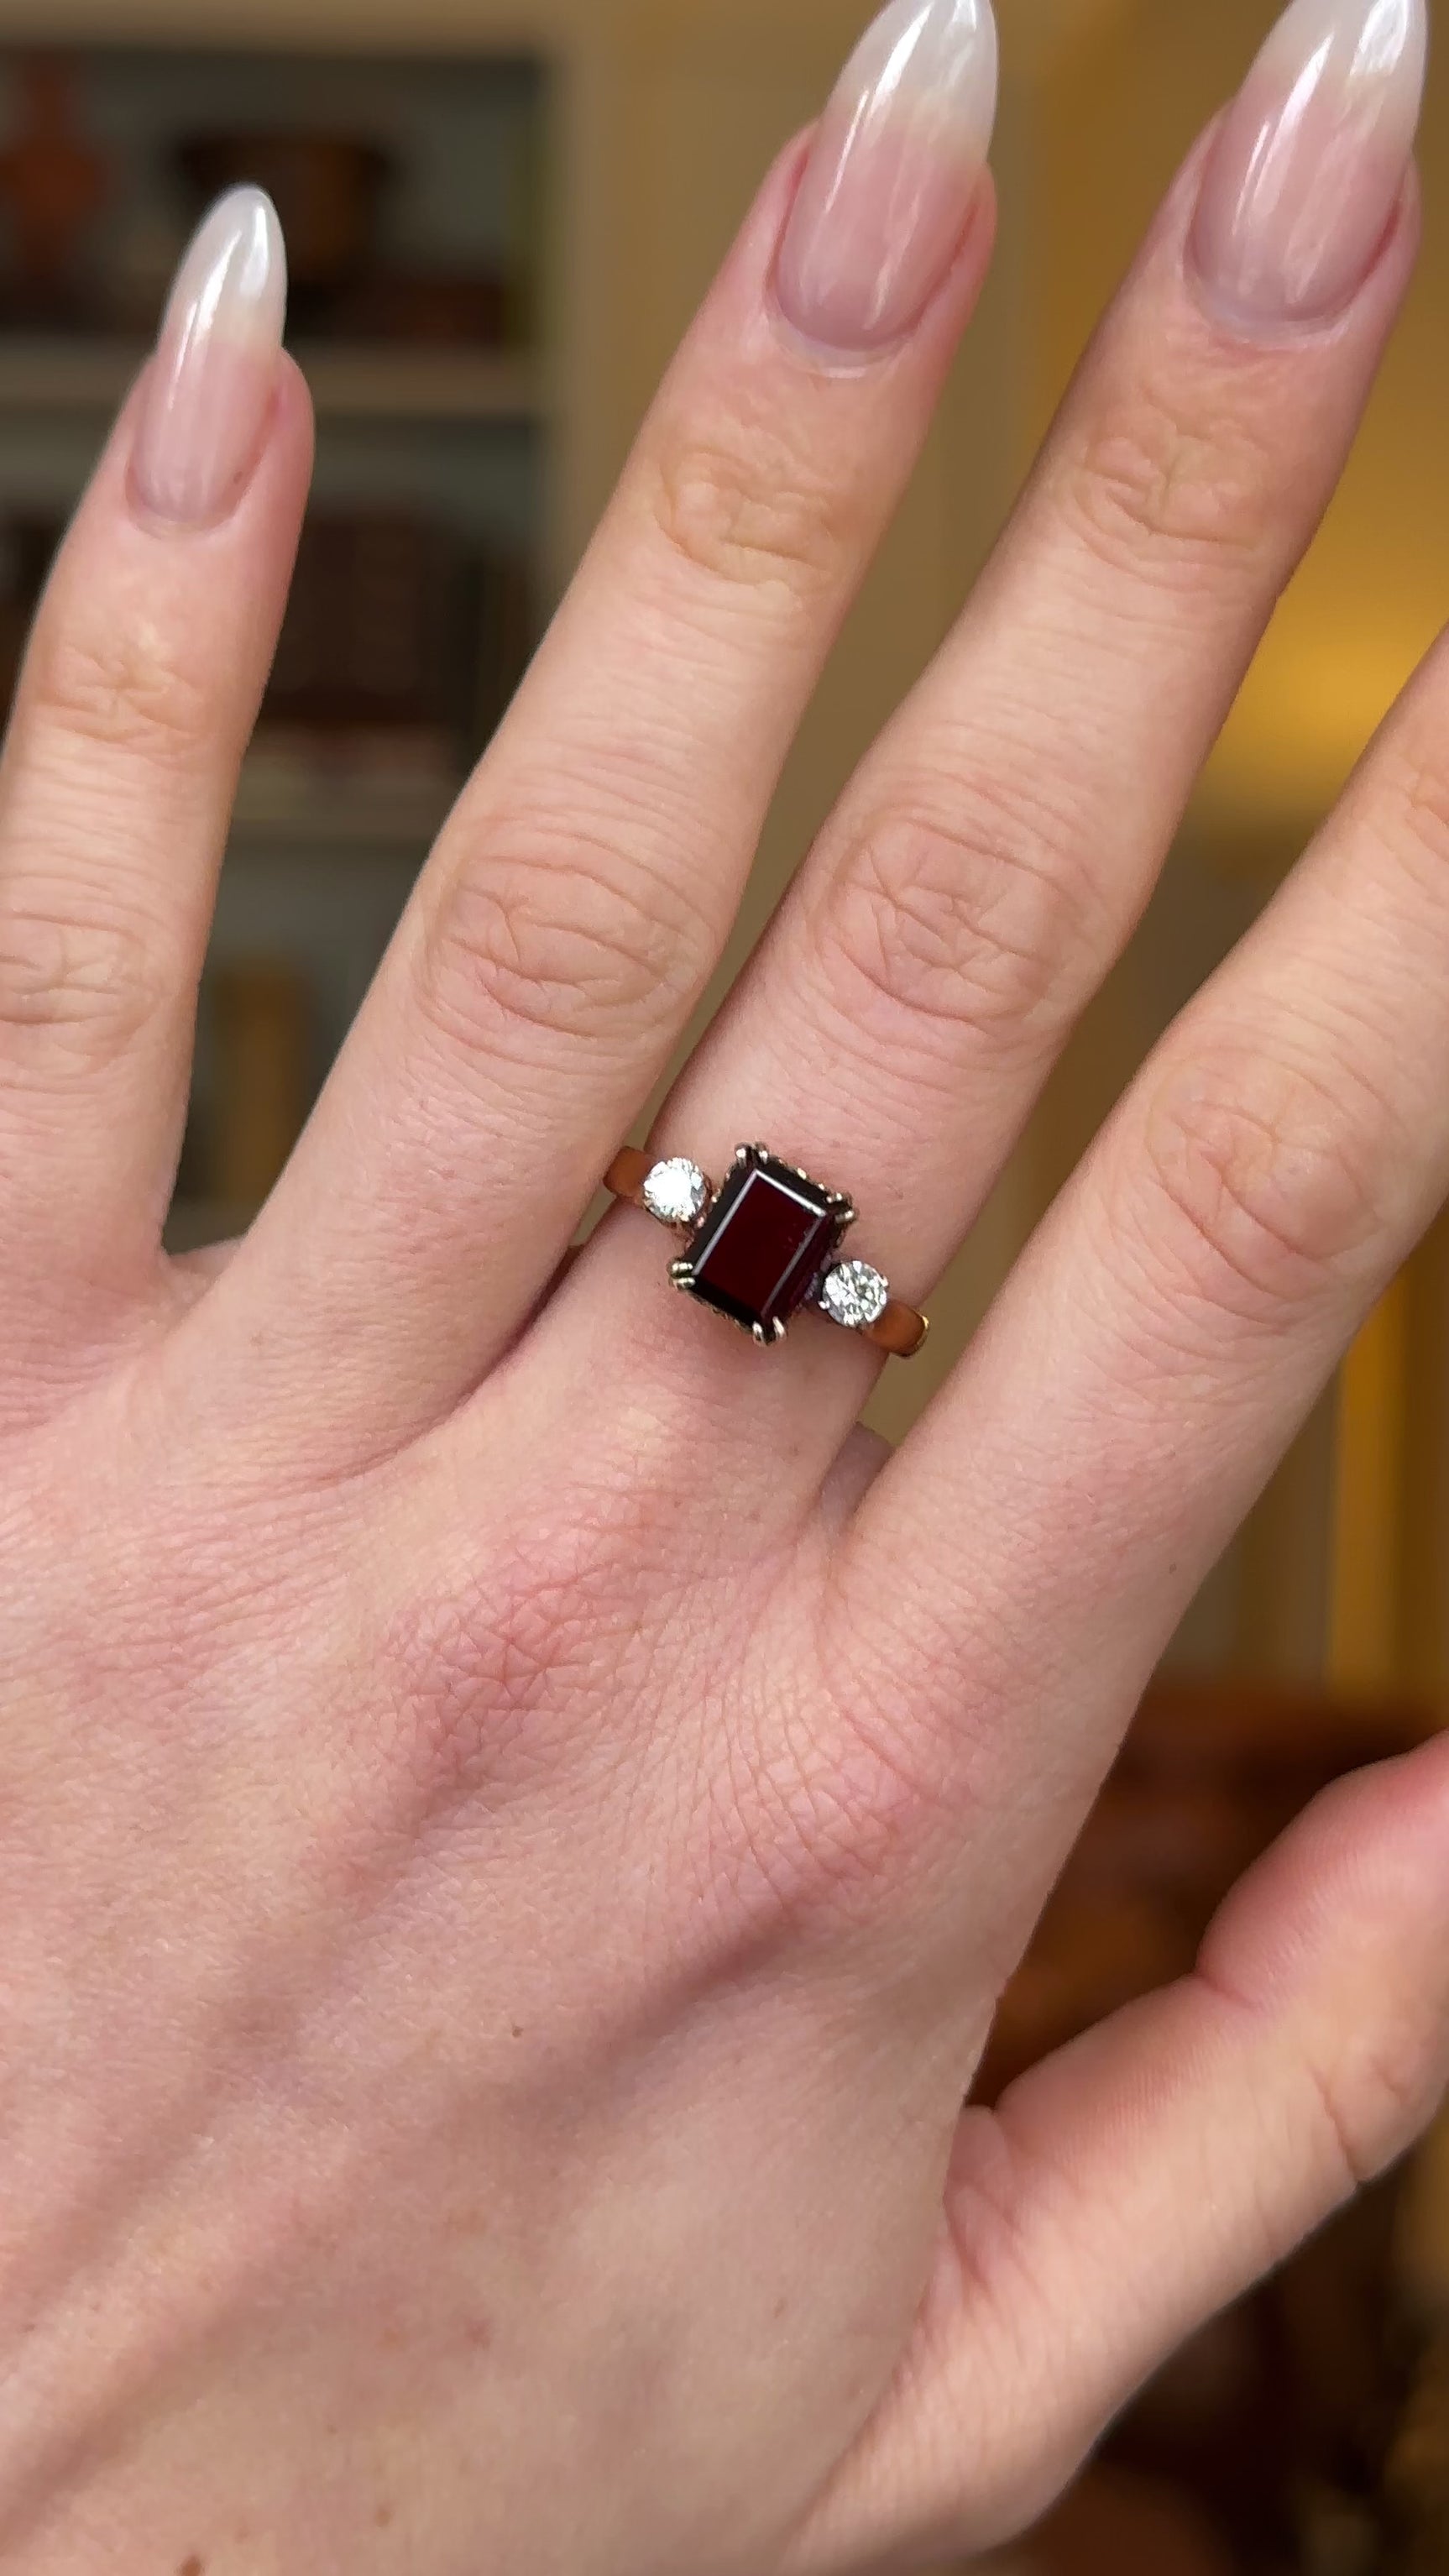 Vintage, 1940s Three-Stone Garnet and Diamond Ring, 18ct Rosy Yellow Gold worn on hand and rotated to give perspective.